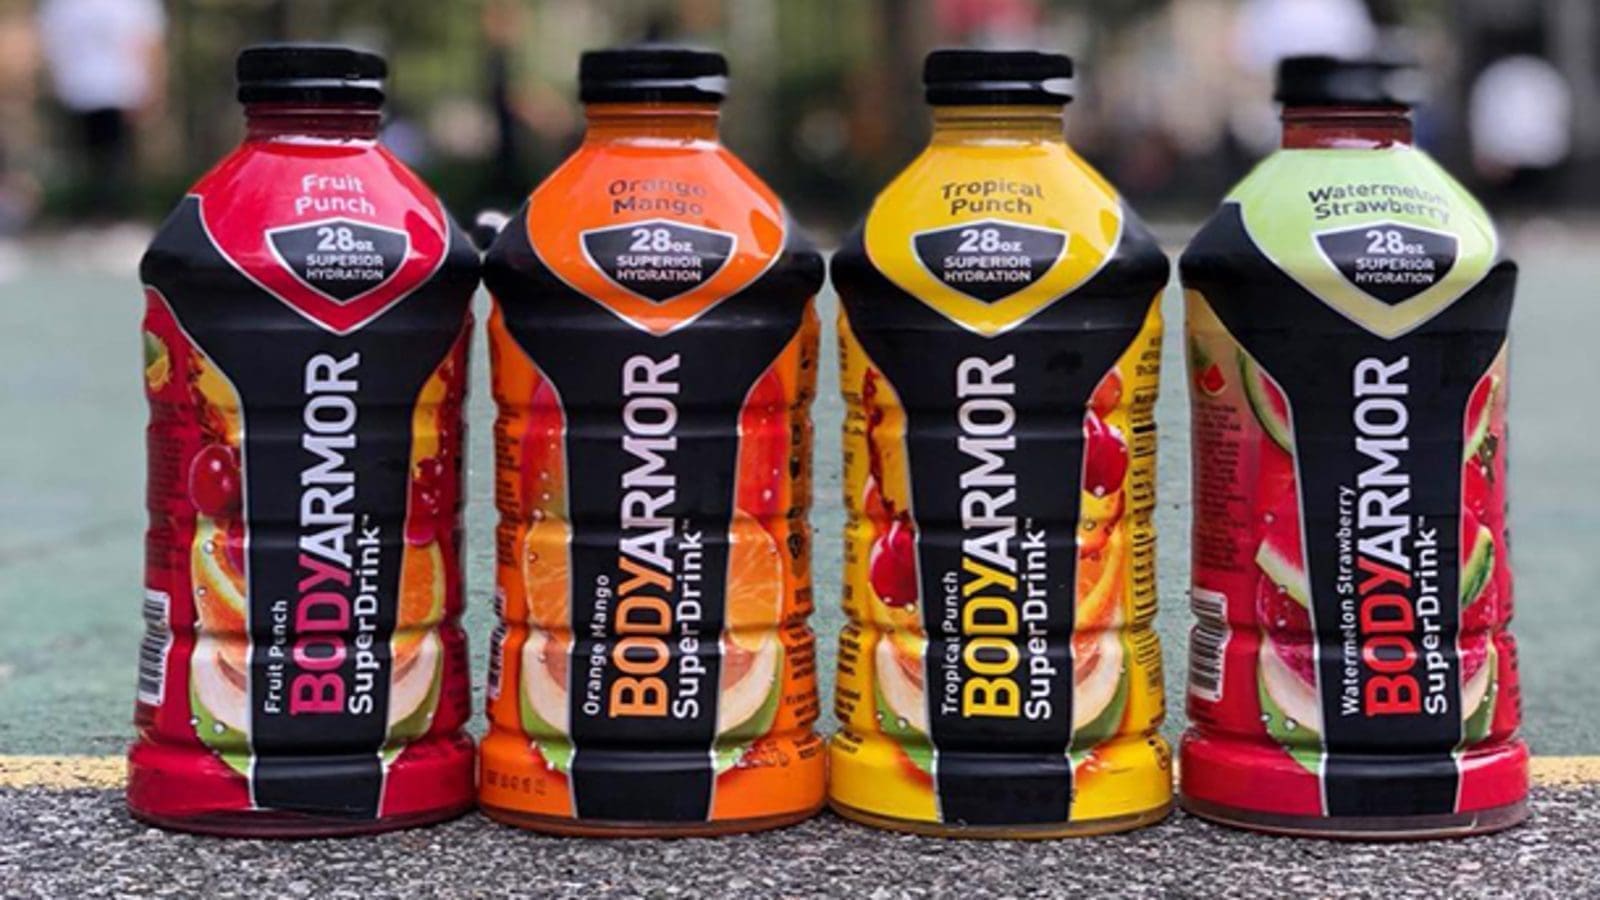 Coca-Cola acquires sports drink brand Bodyarmor in US$5.6 billion deal, unveils first 100% plant-based plastic bottle